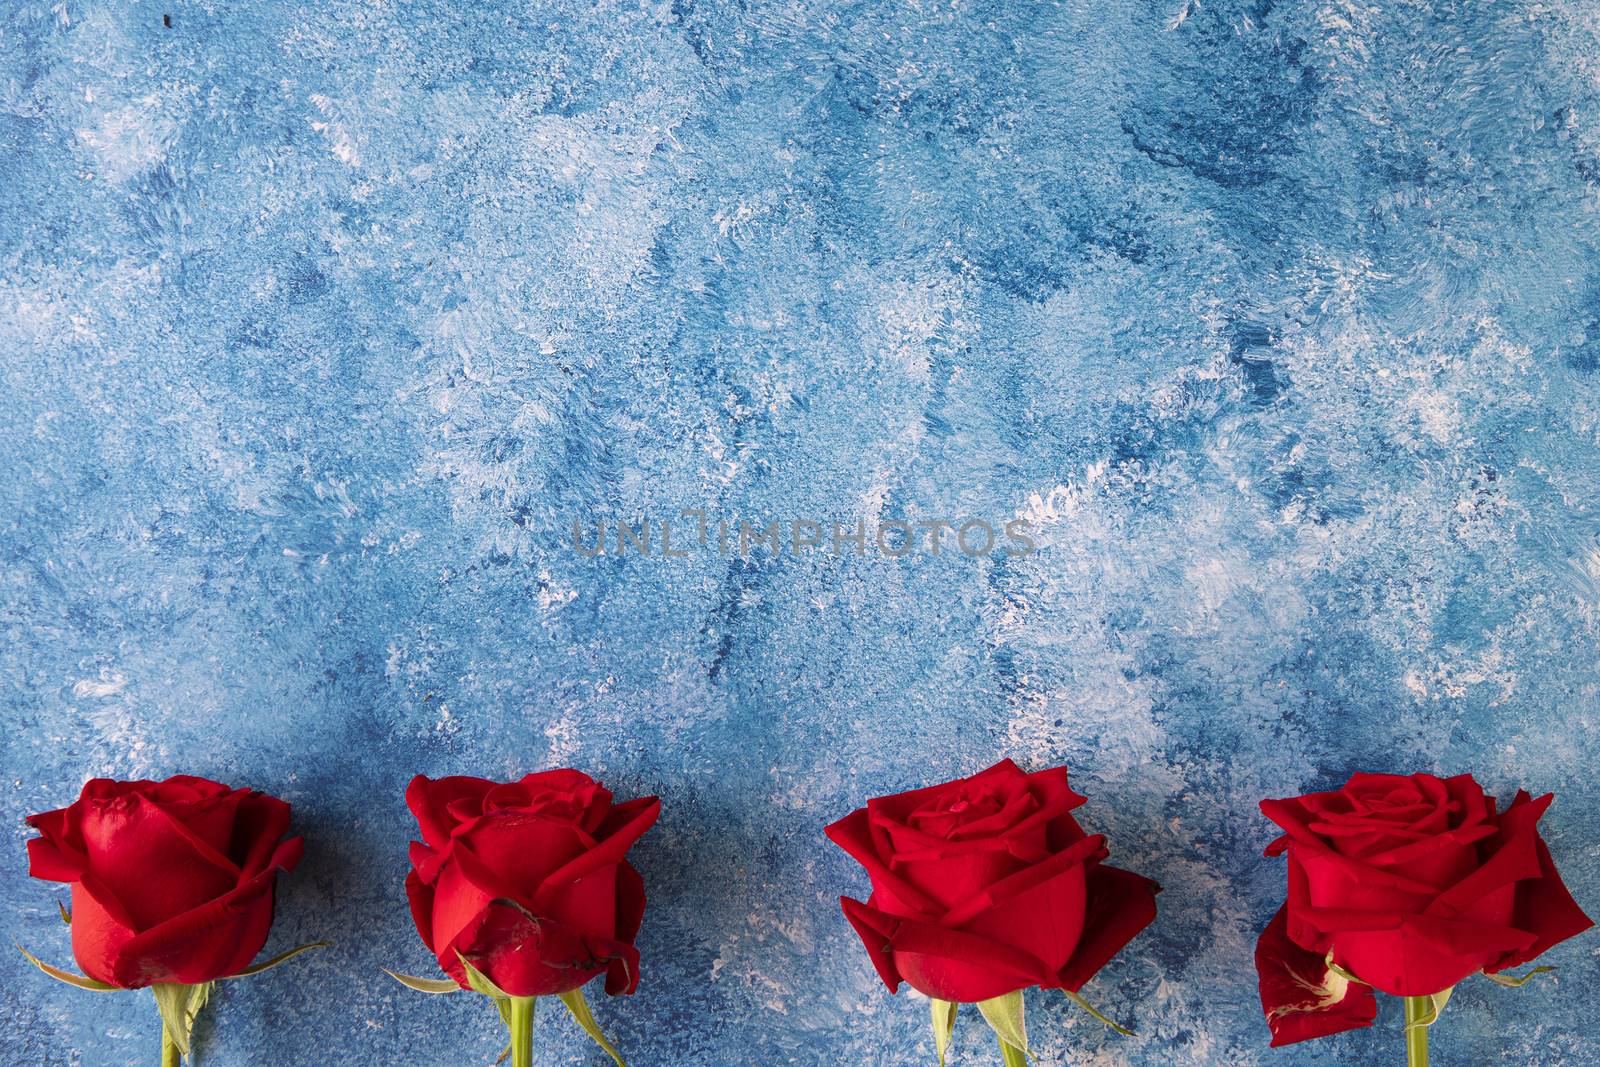 Beautiful blooming red roses on blue and white acrylic background.